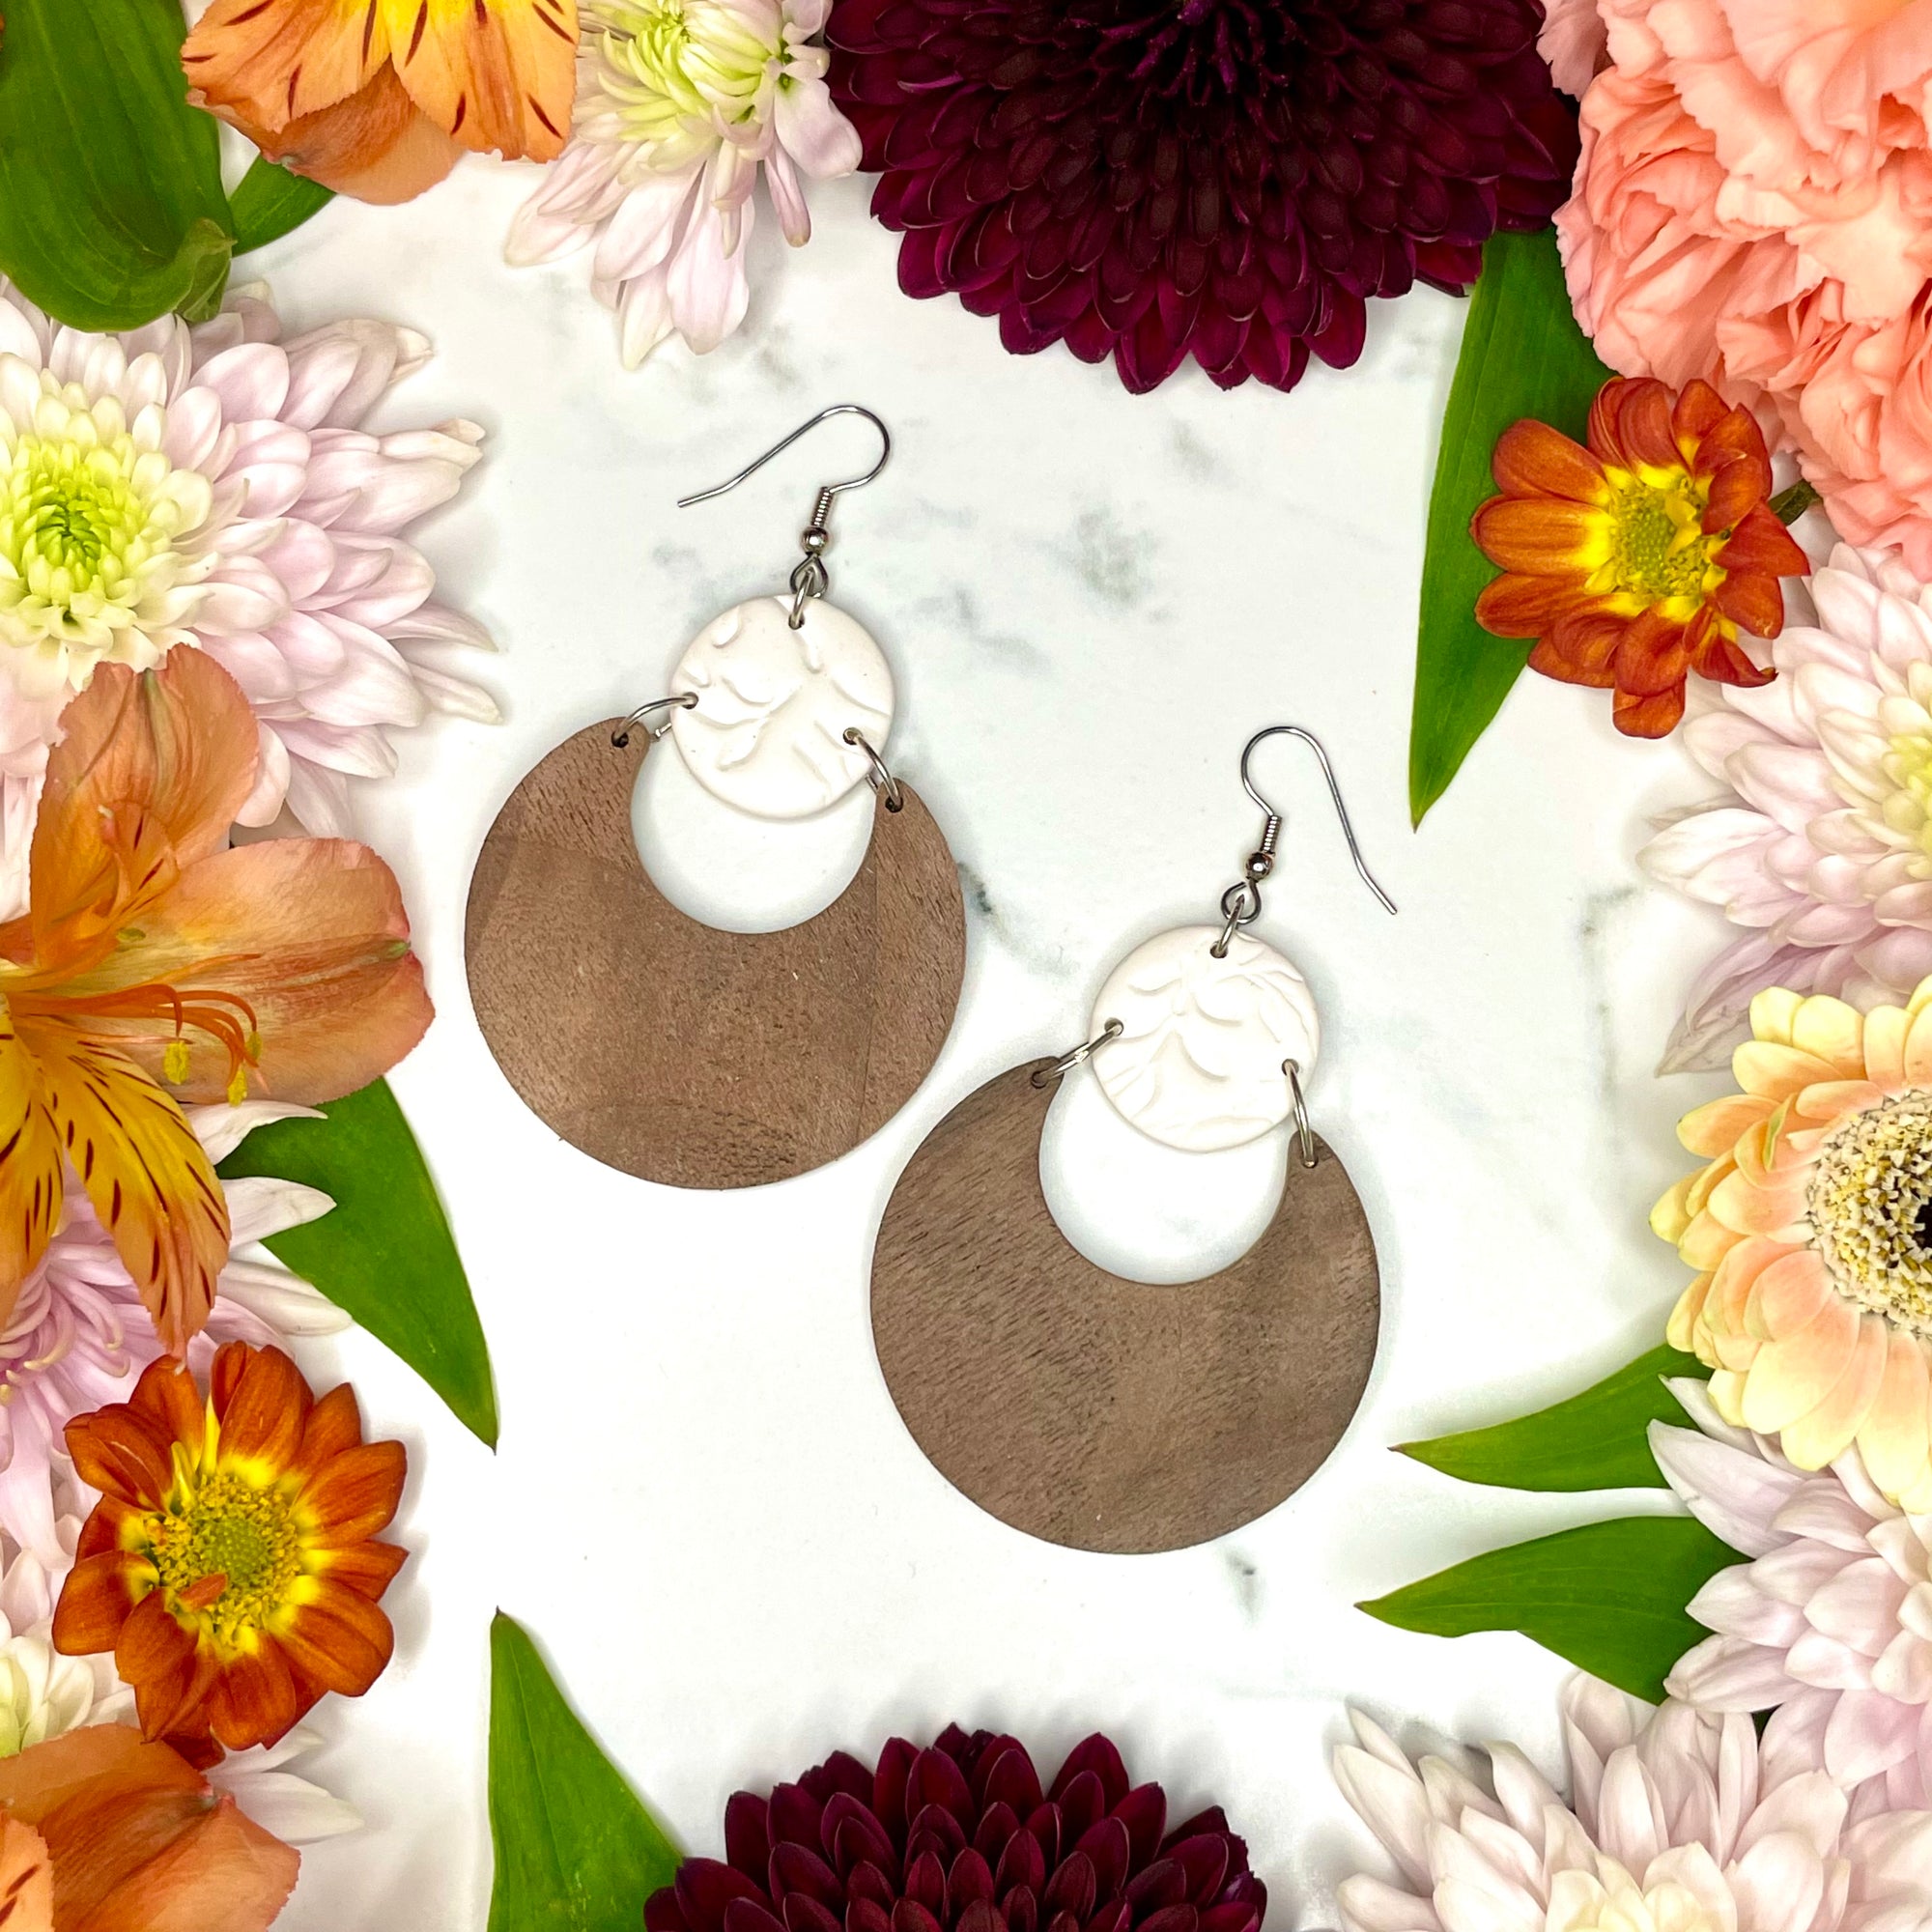 Black Walnut Half-moon Earrings with White Clay Charms